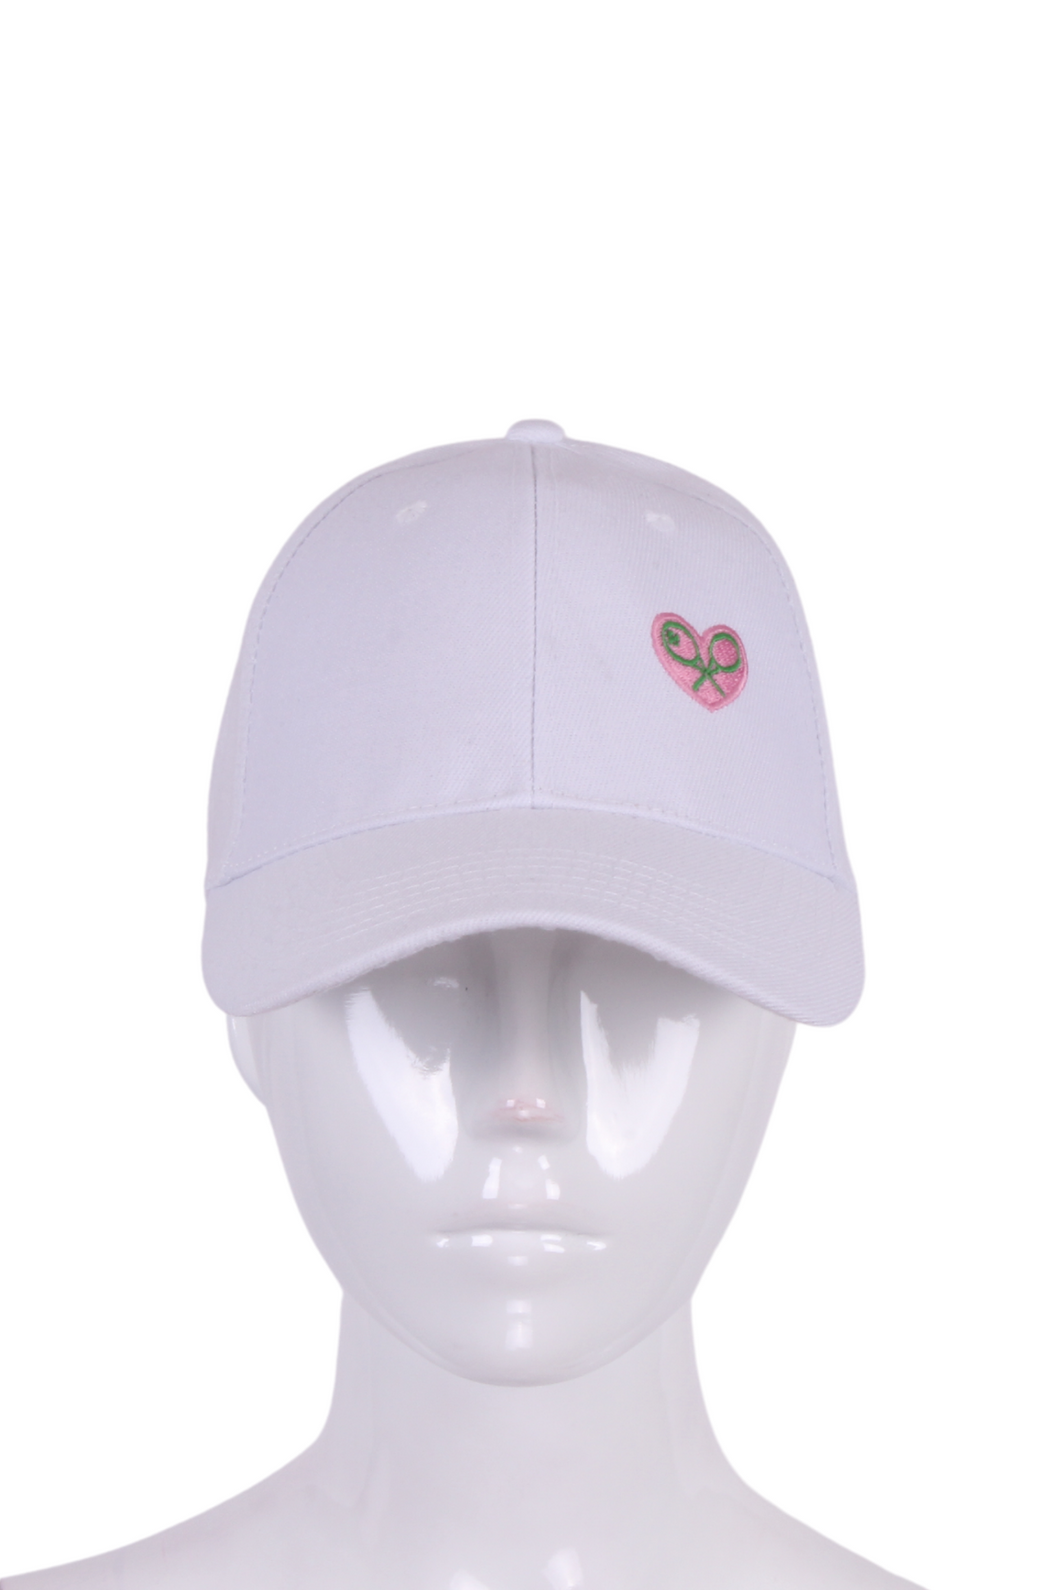 Spring Collection Trucker Hat with Pink Heart + Rackets Logo - I LOVE MY DOUBLES PARTNER!!!